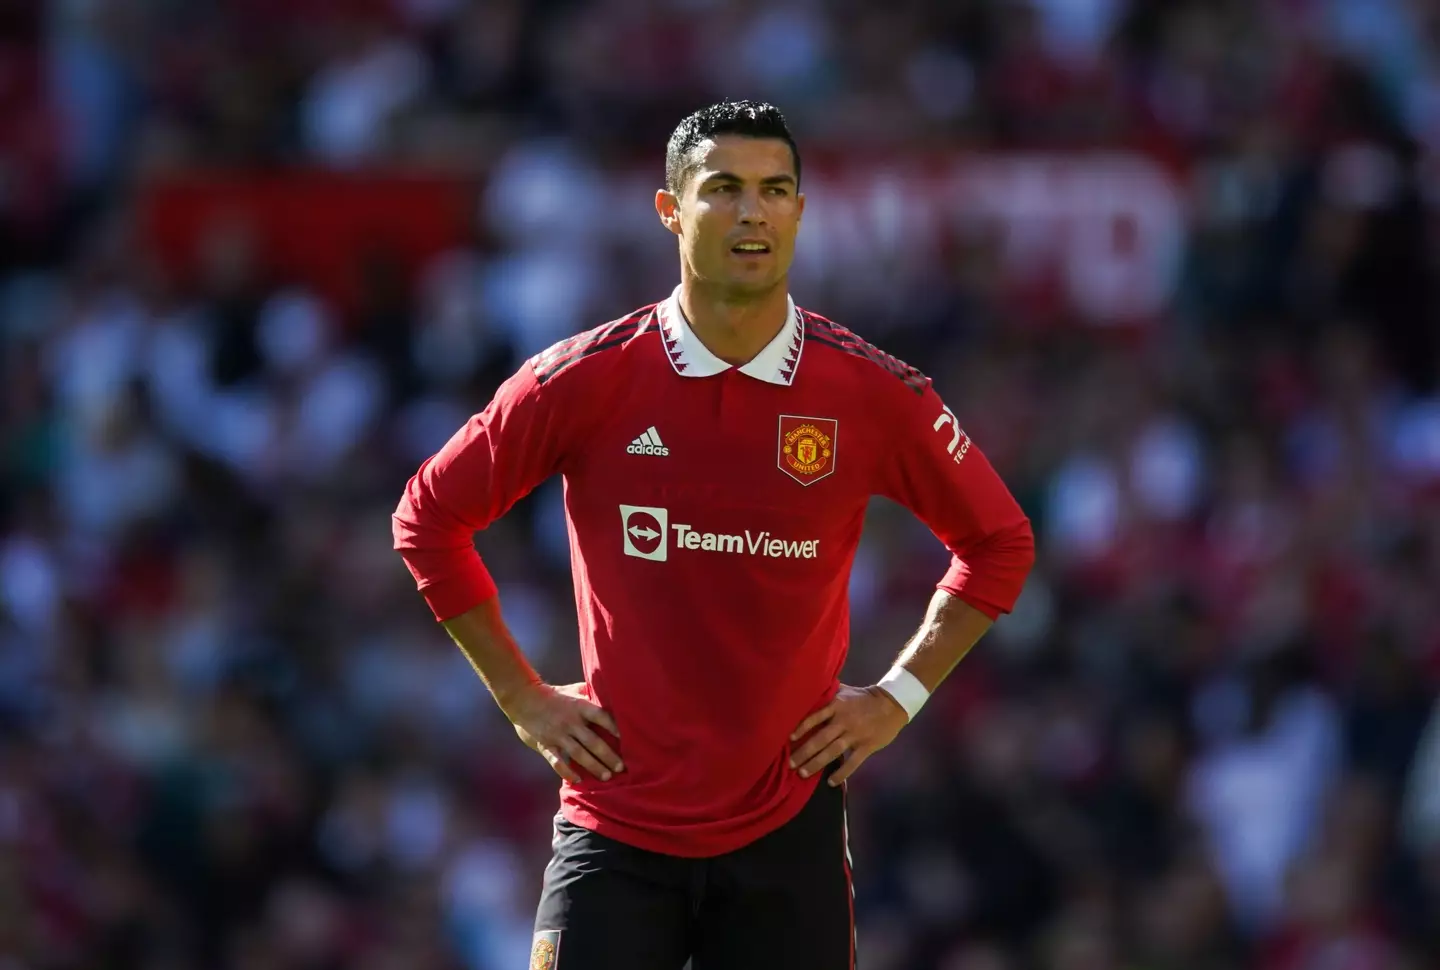 Ronaldo is seeking a move away from United this summer